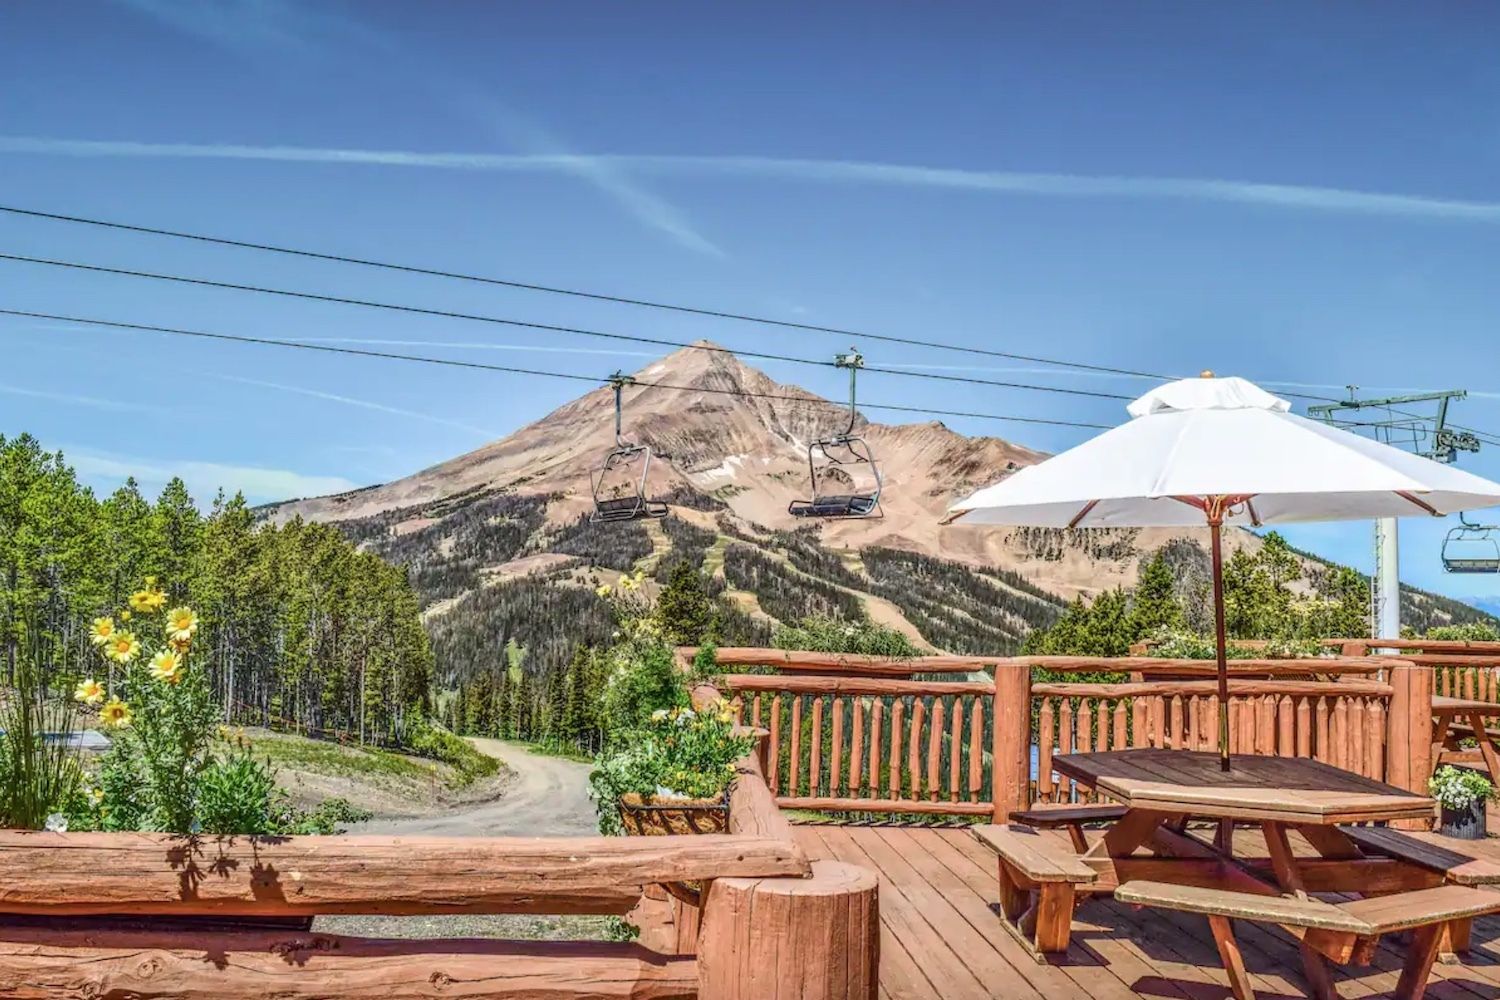 Airbnb Andesite Mountain in Big Sky, Montana deck view, airbnb montana mountain stay